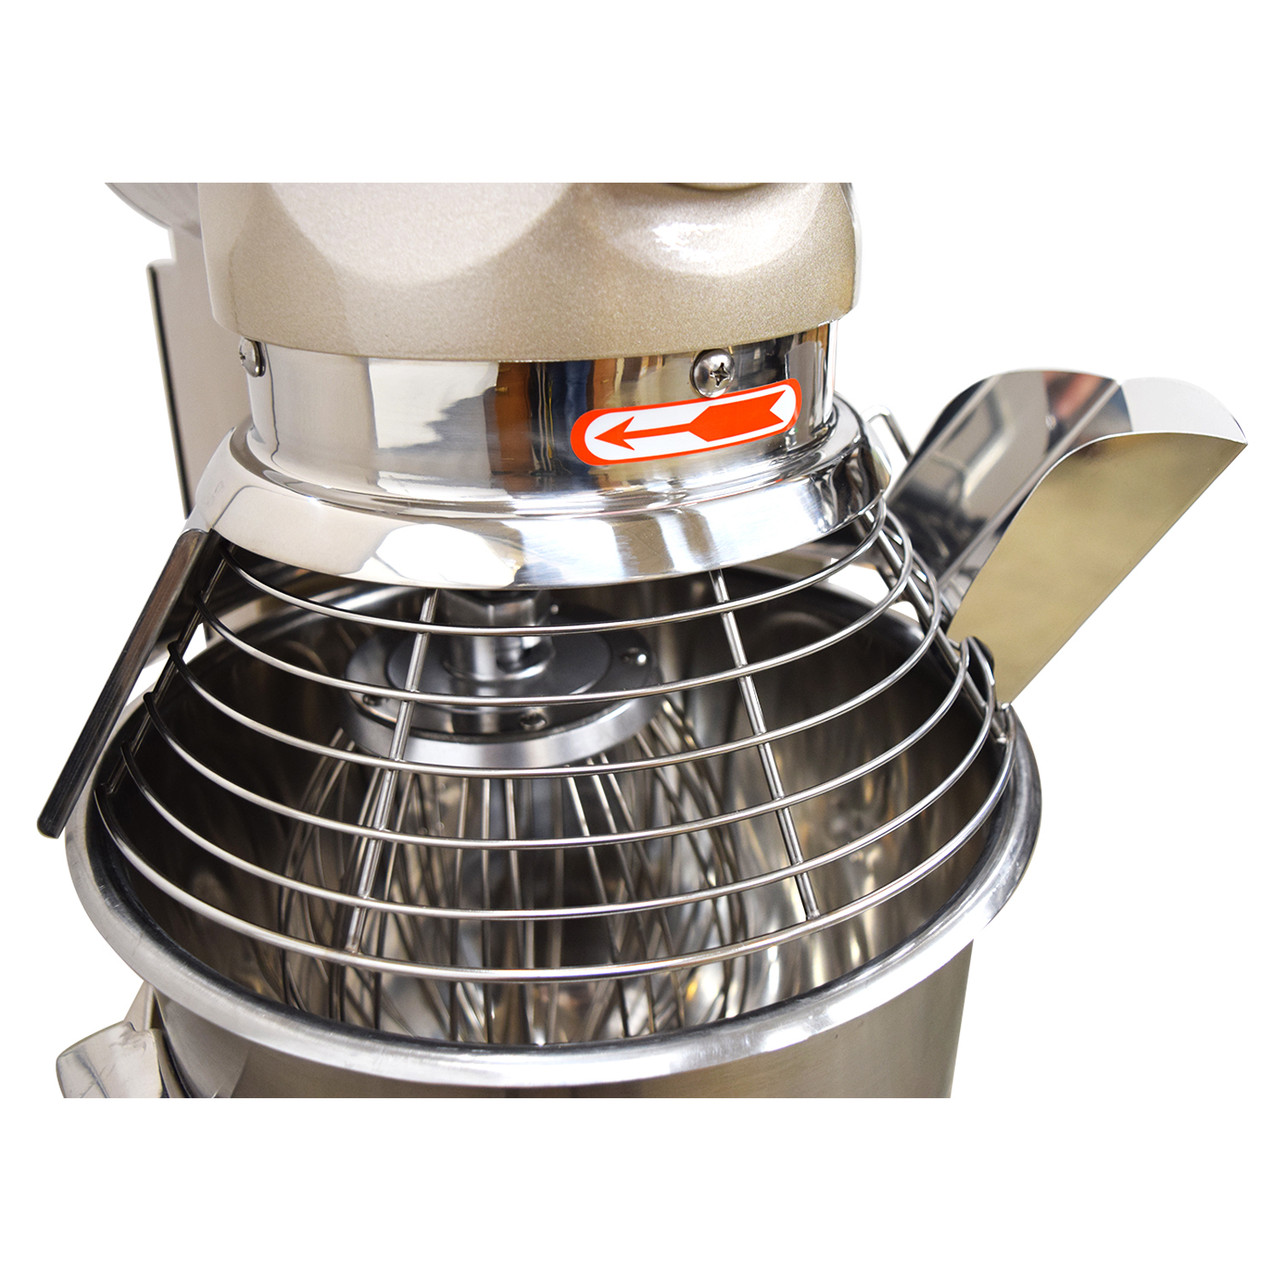 AEG-20A 20 Quart Commercial Planetary Mixer Feeder Chute - Pour Ingredients While Mixing